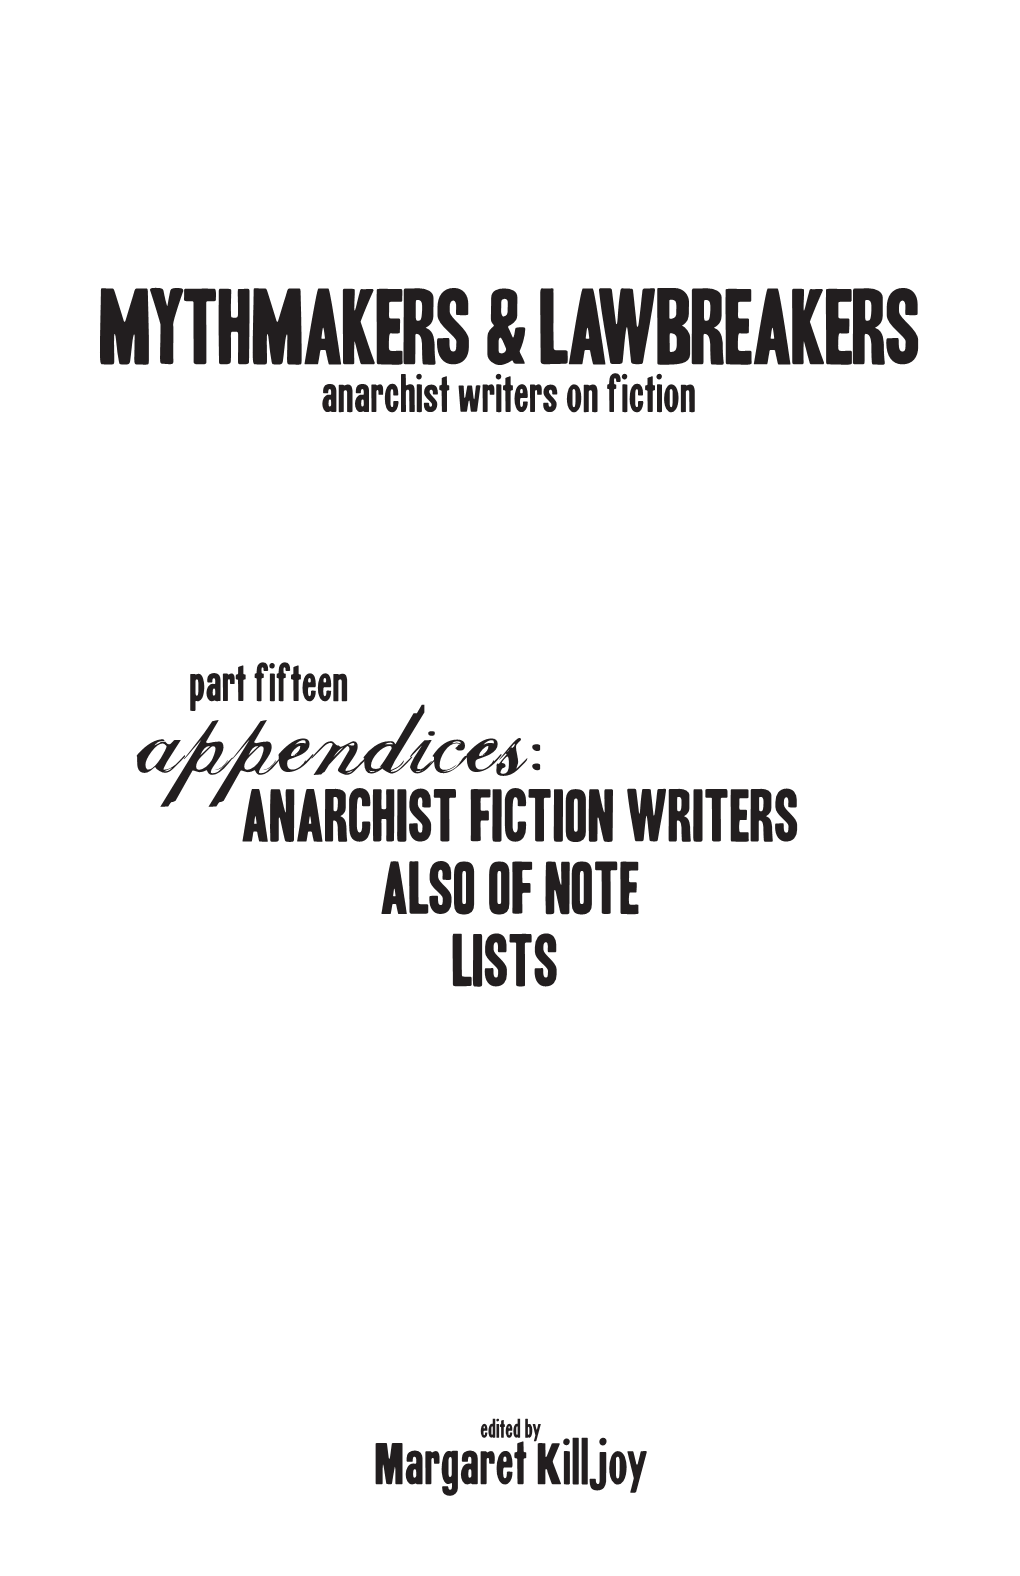 Appendices:Part Fifteen Anarchist Fiction Writers Also of Note Lists